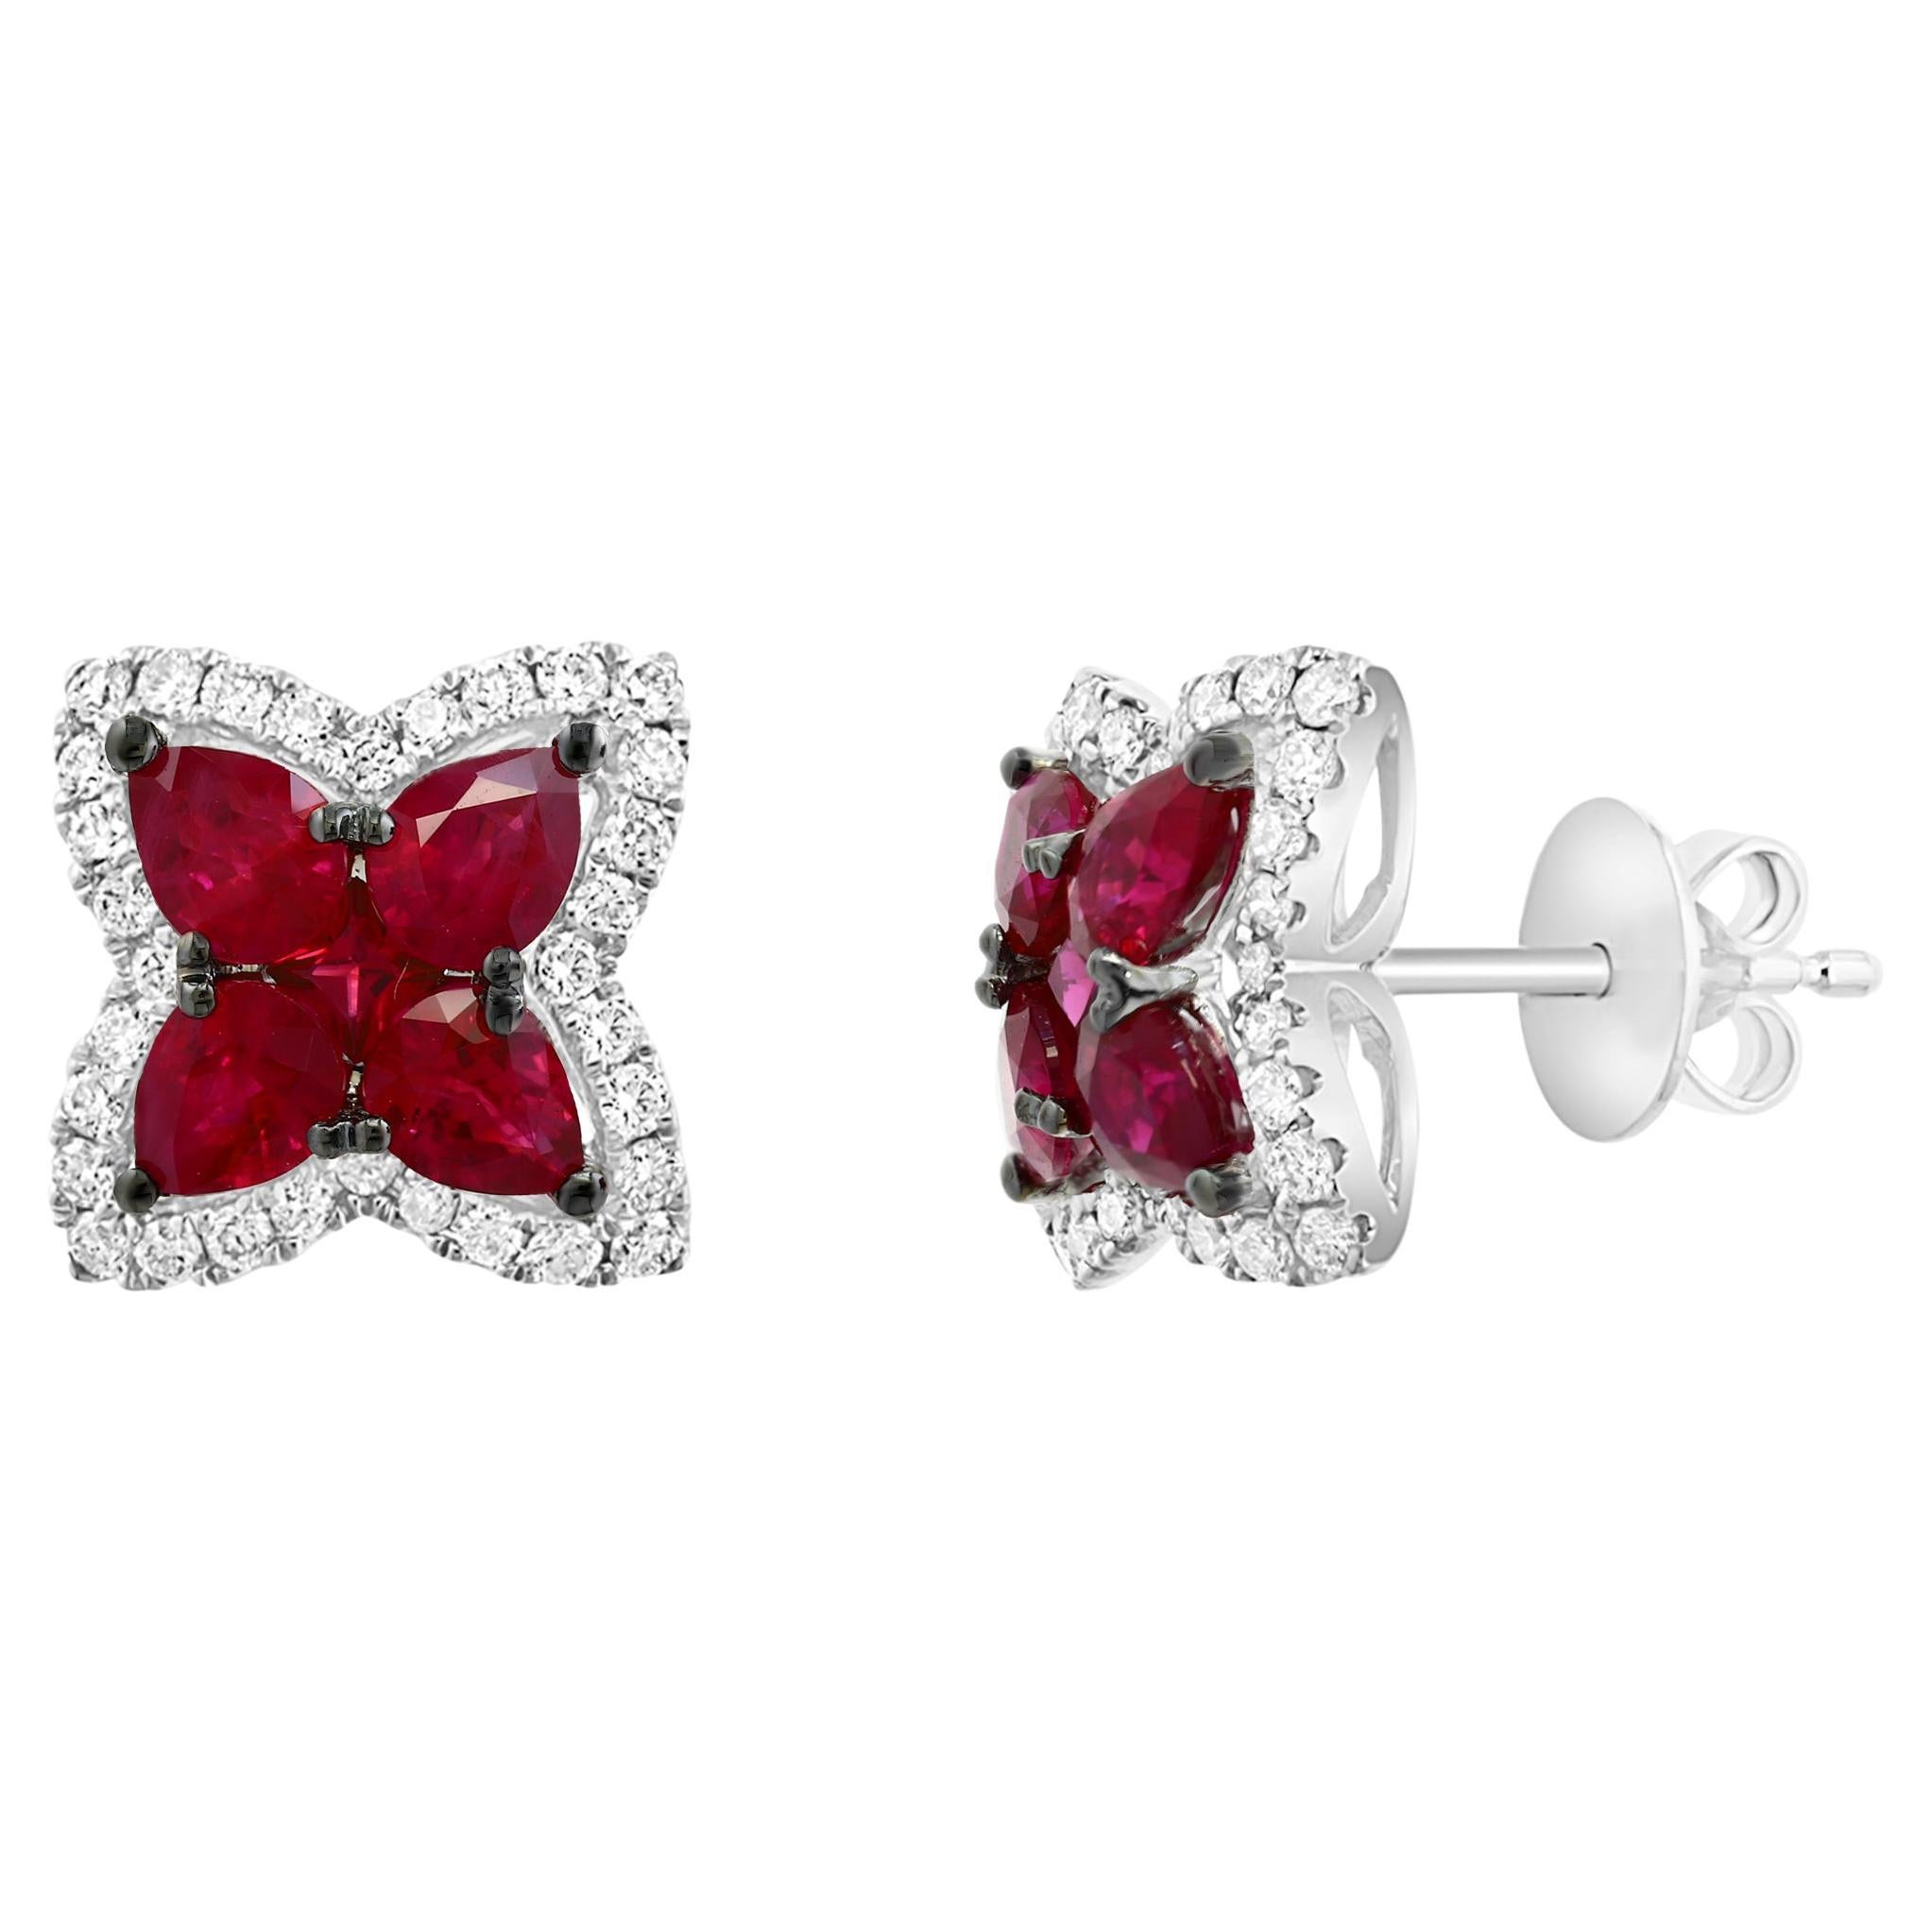 1.43 Carat Pear Shape Ruby and Diamond Stud Earrings in 18K White Gold For Sale